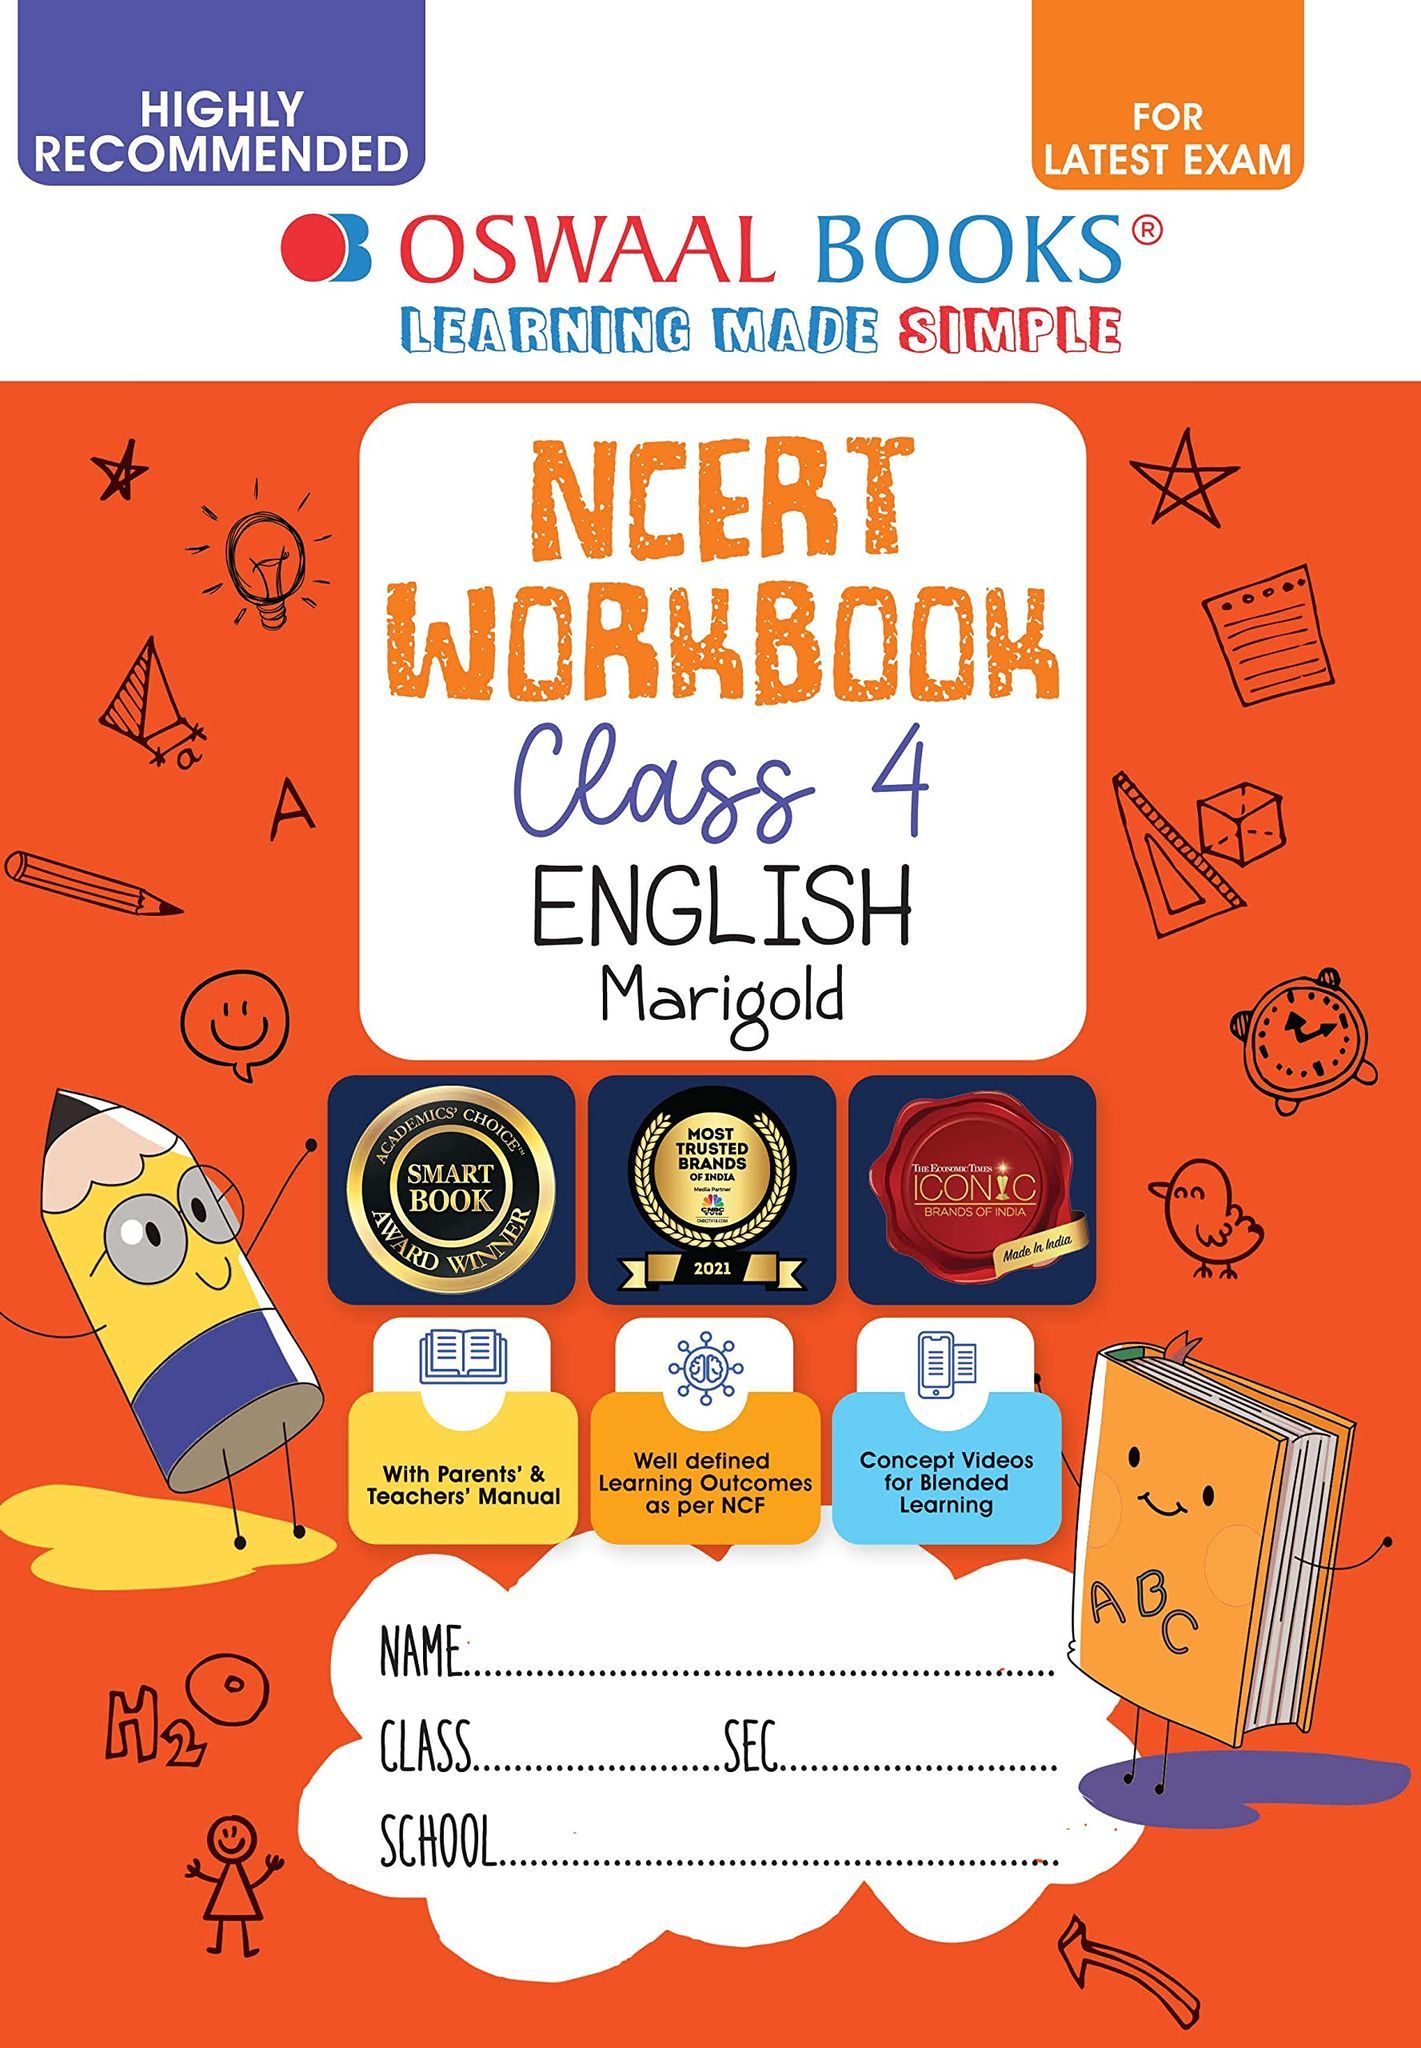 Oswaal NCERT Workbook English (Marigold) Class 4 (For Latest Exam) [Paperback] Oswaal Editorial Board